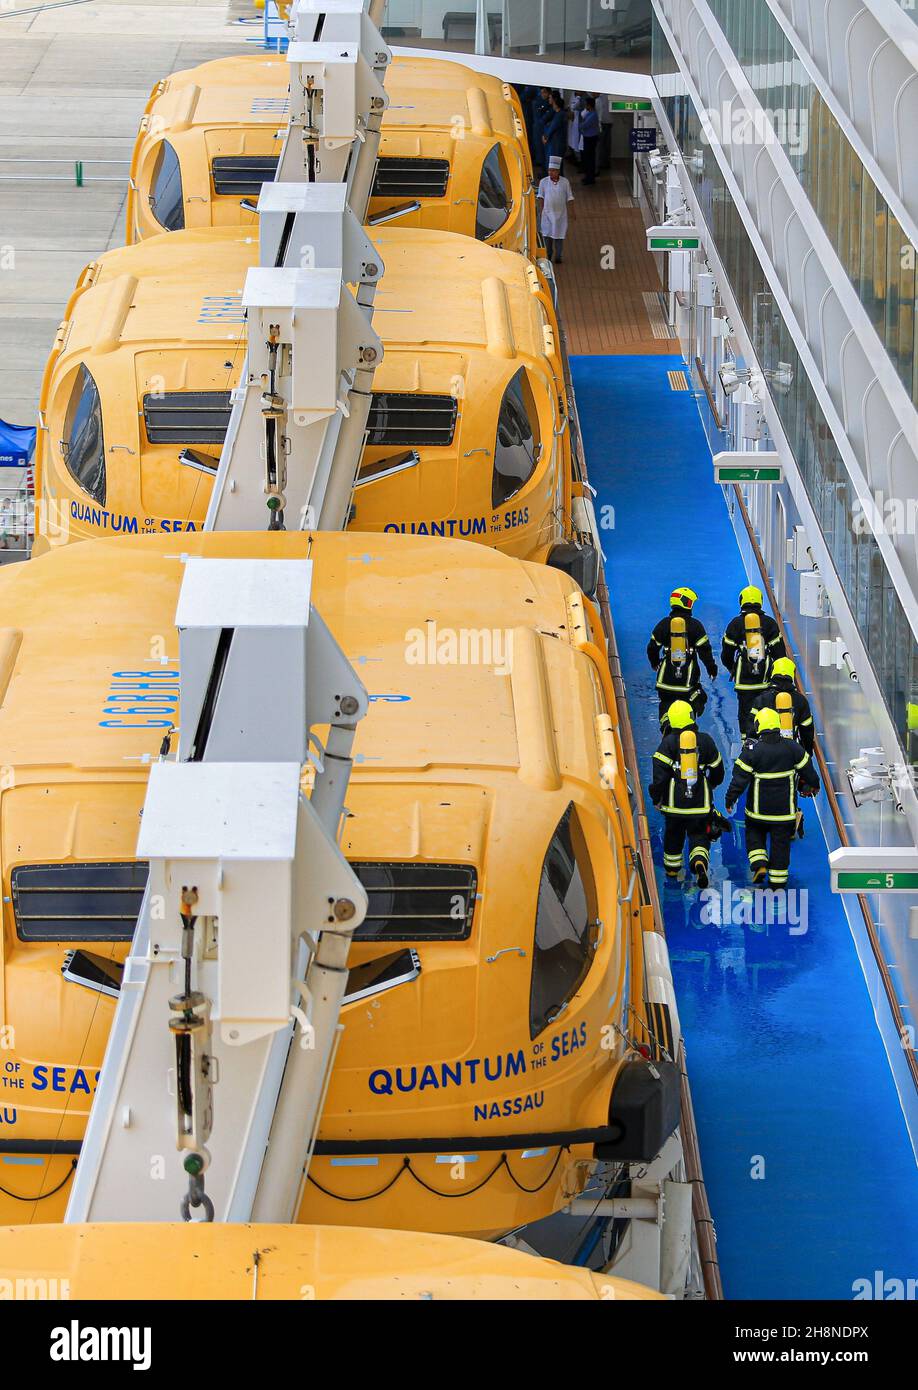 Firefighters in firefighting gear on board Quantum of the Seas cruise ship, Royal Caribbean cruise line, fire fighter, firemen,davits, passenger ships Stock Photo